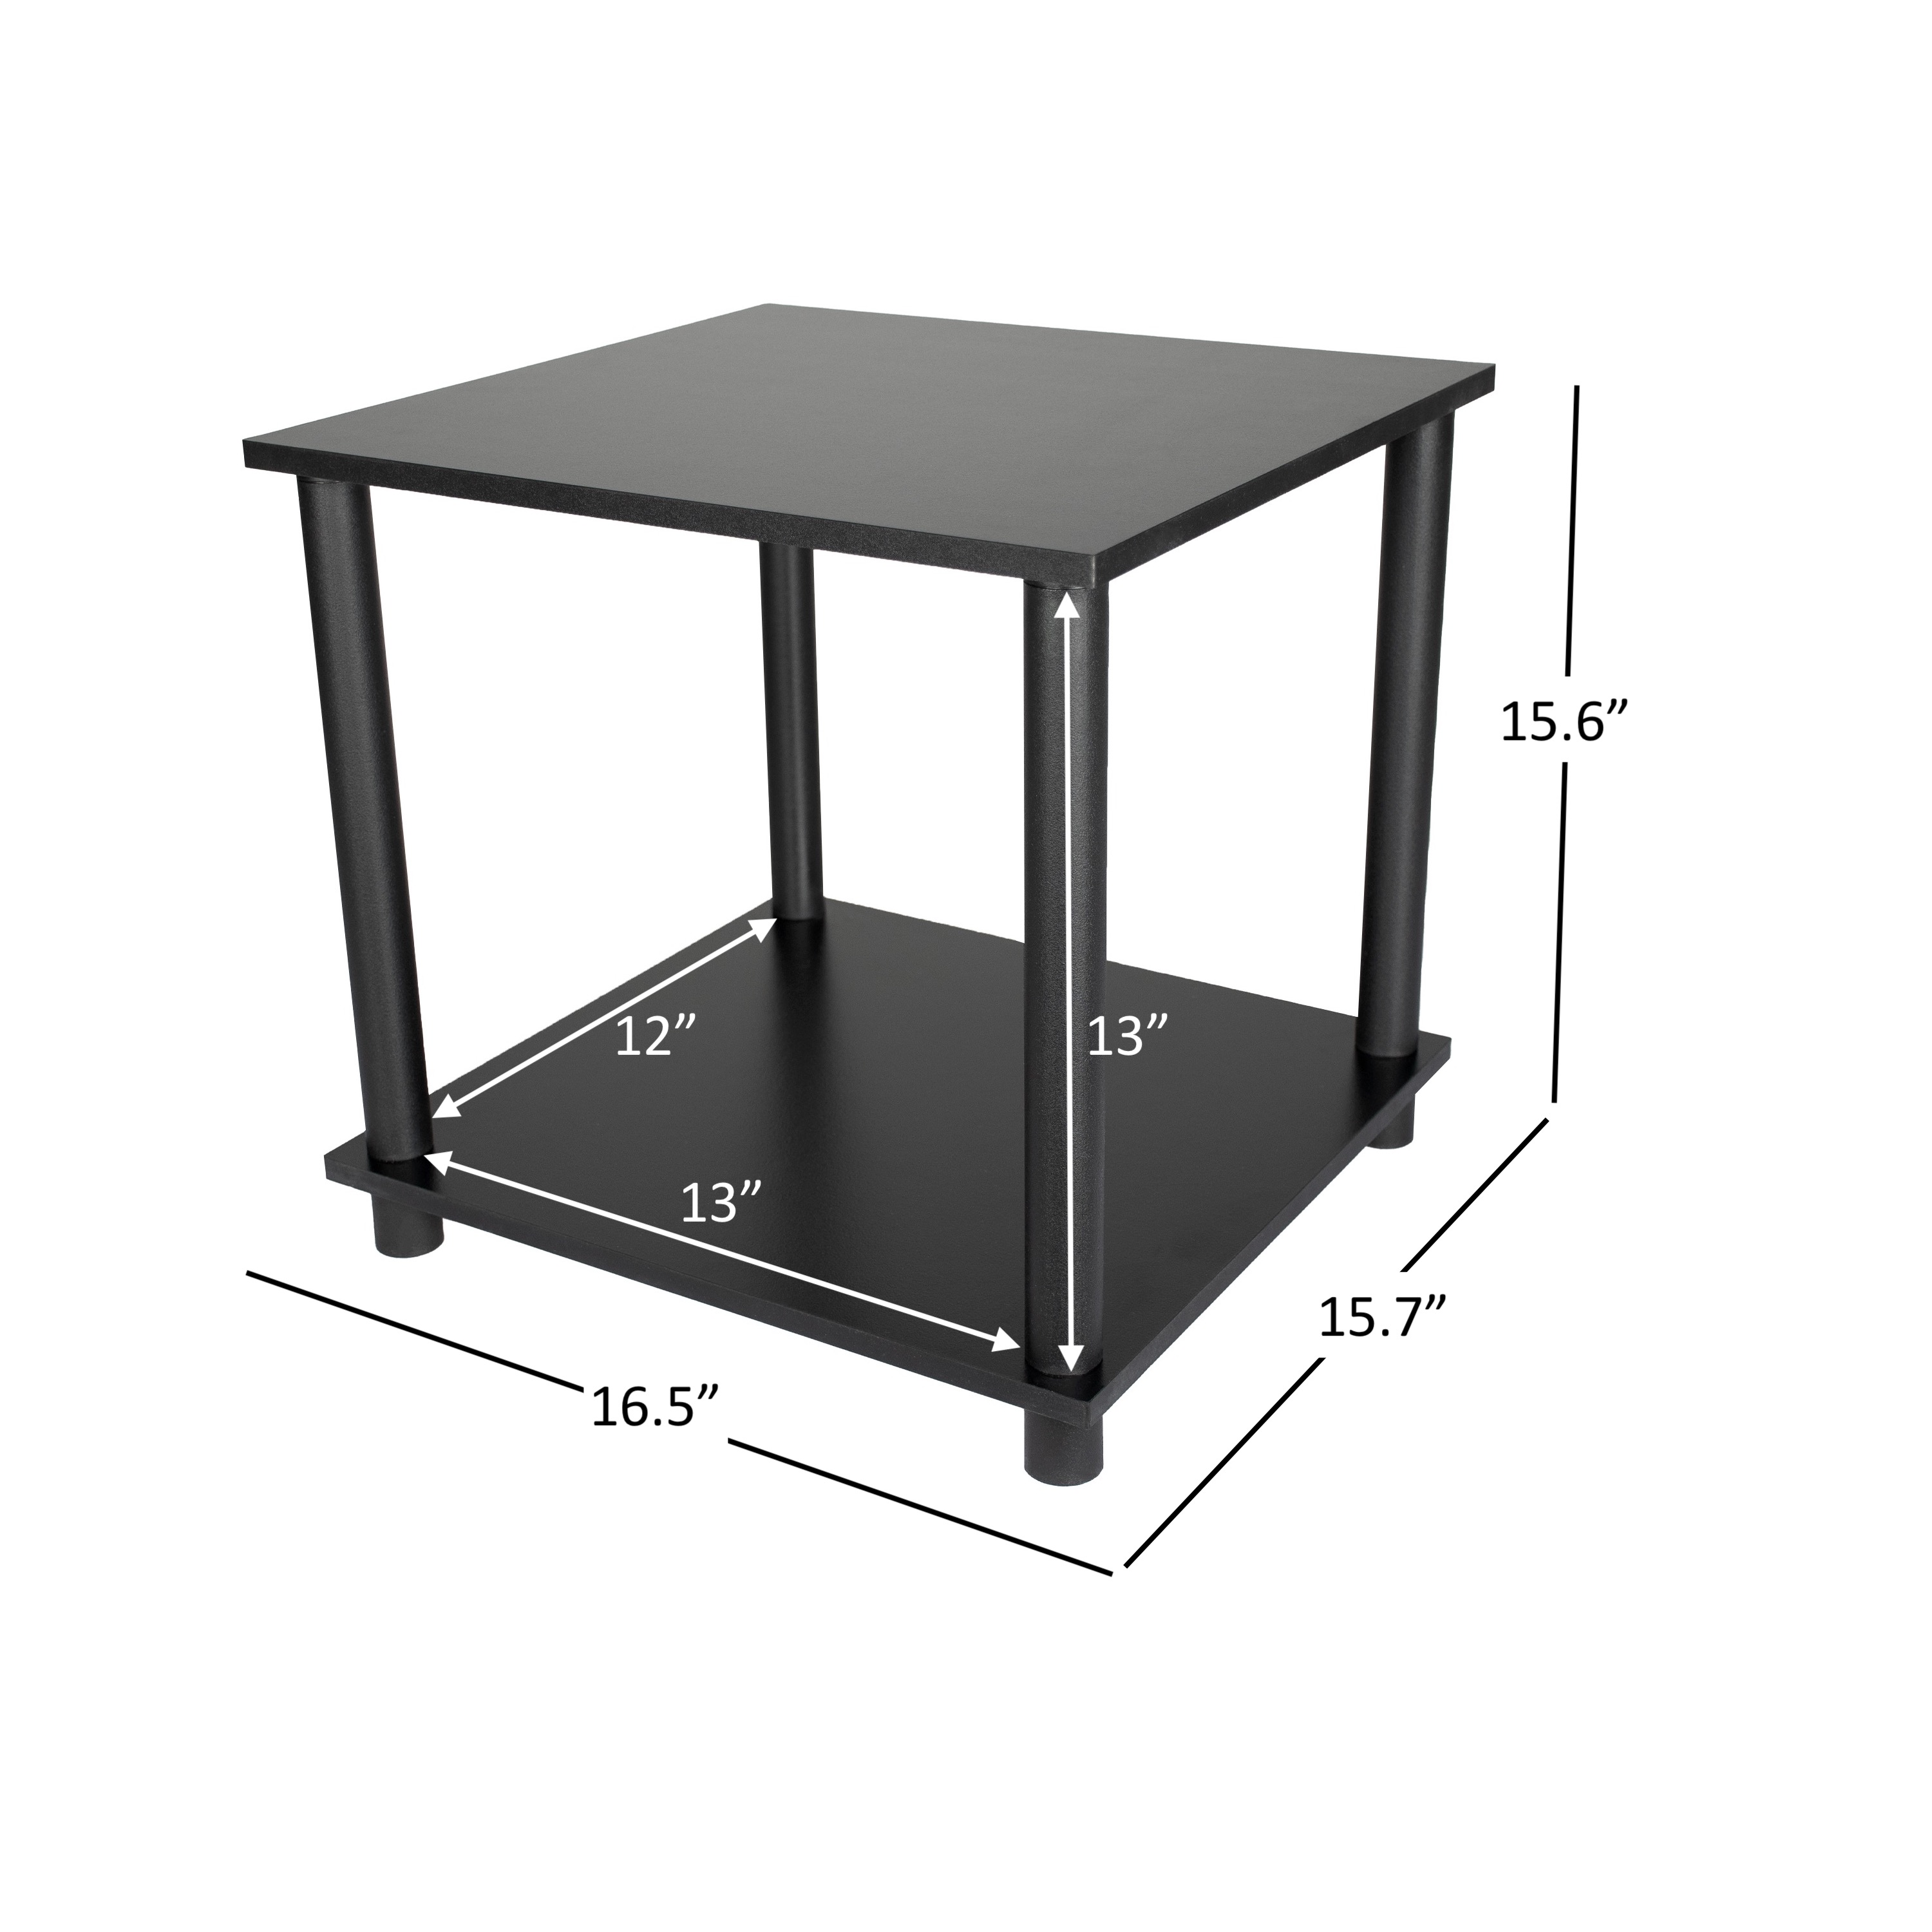 Mainstays No Tools End Tables, Solid Black, Set of 2 - image 5 of 8